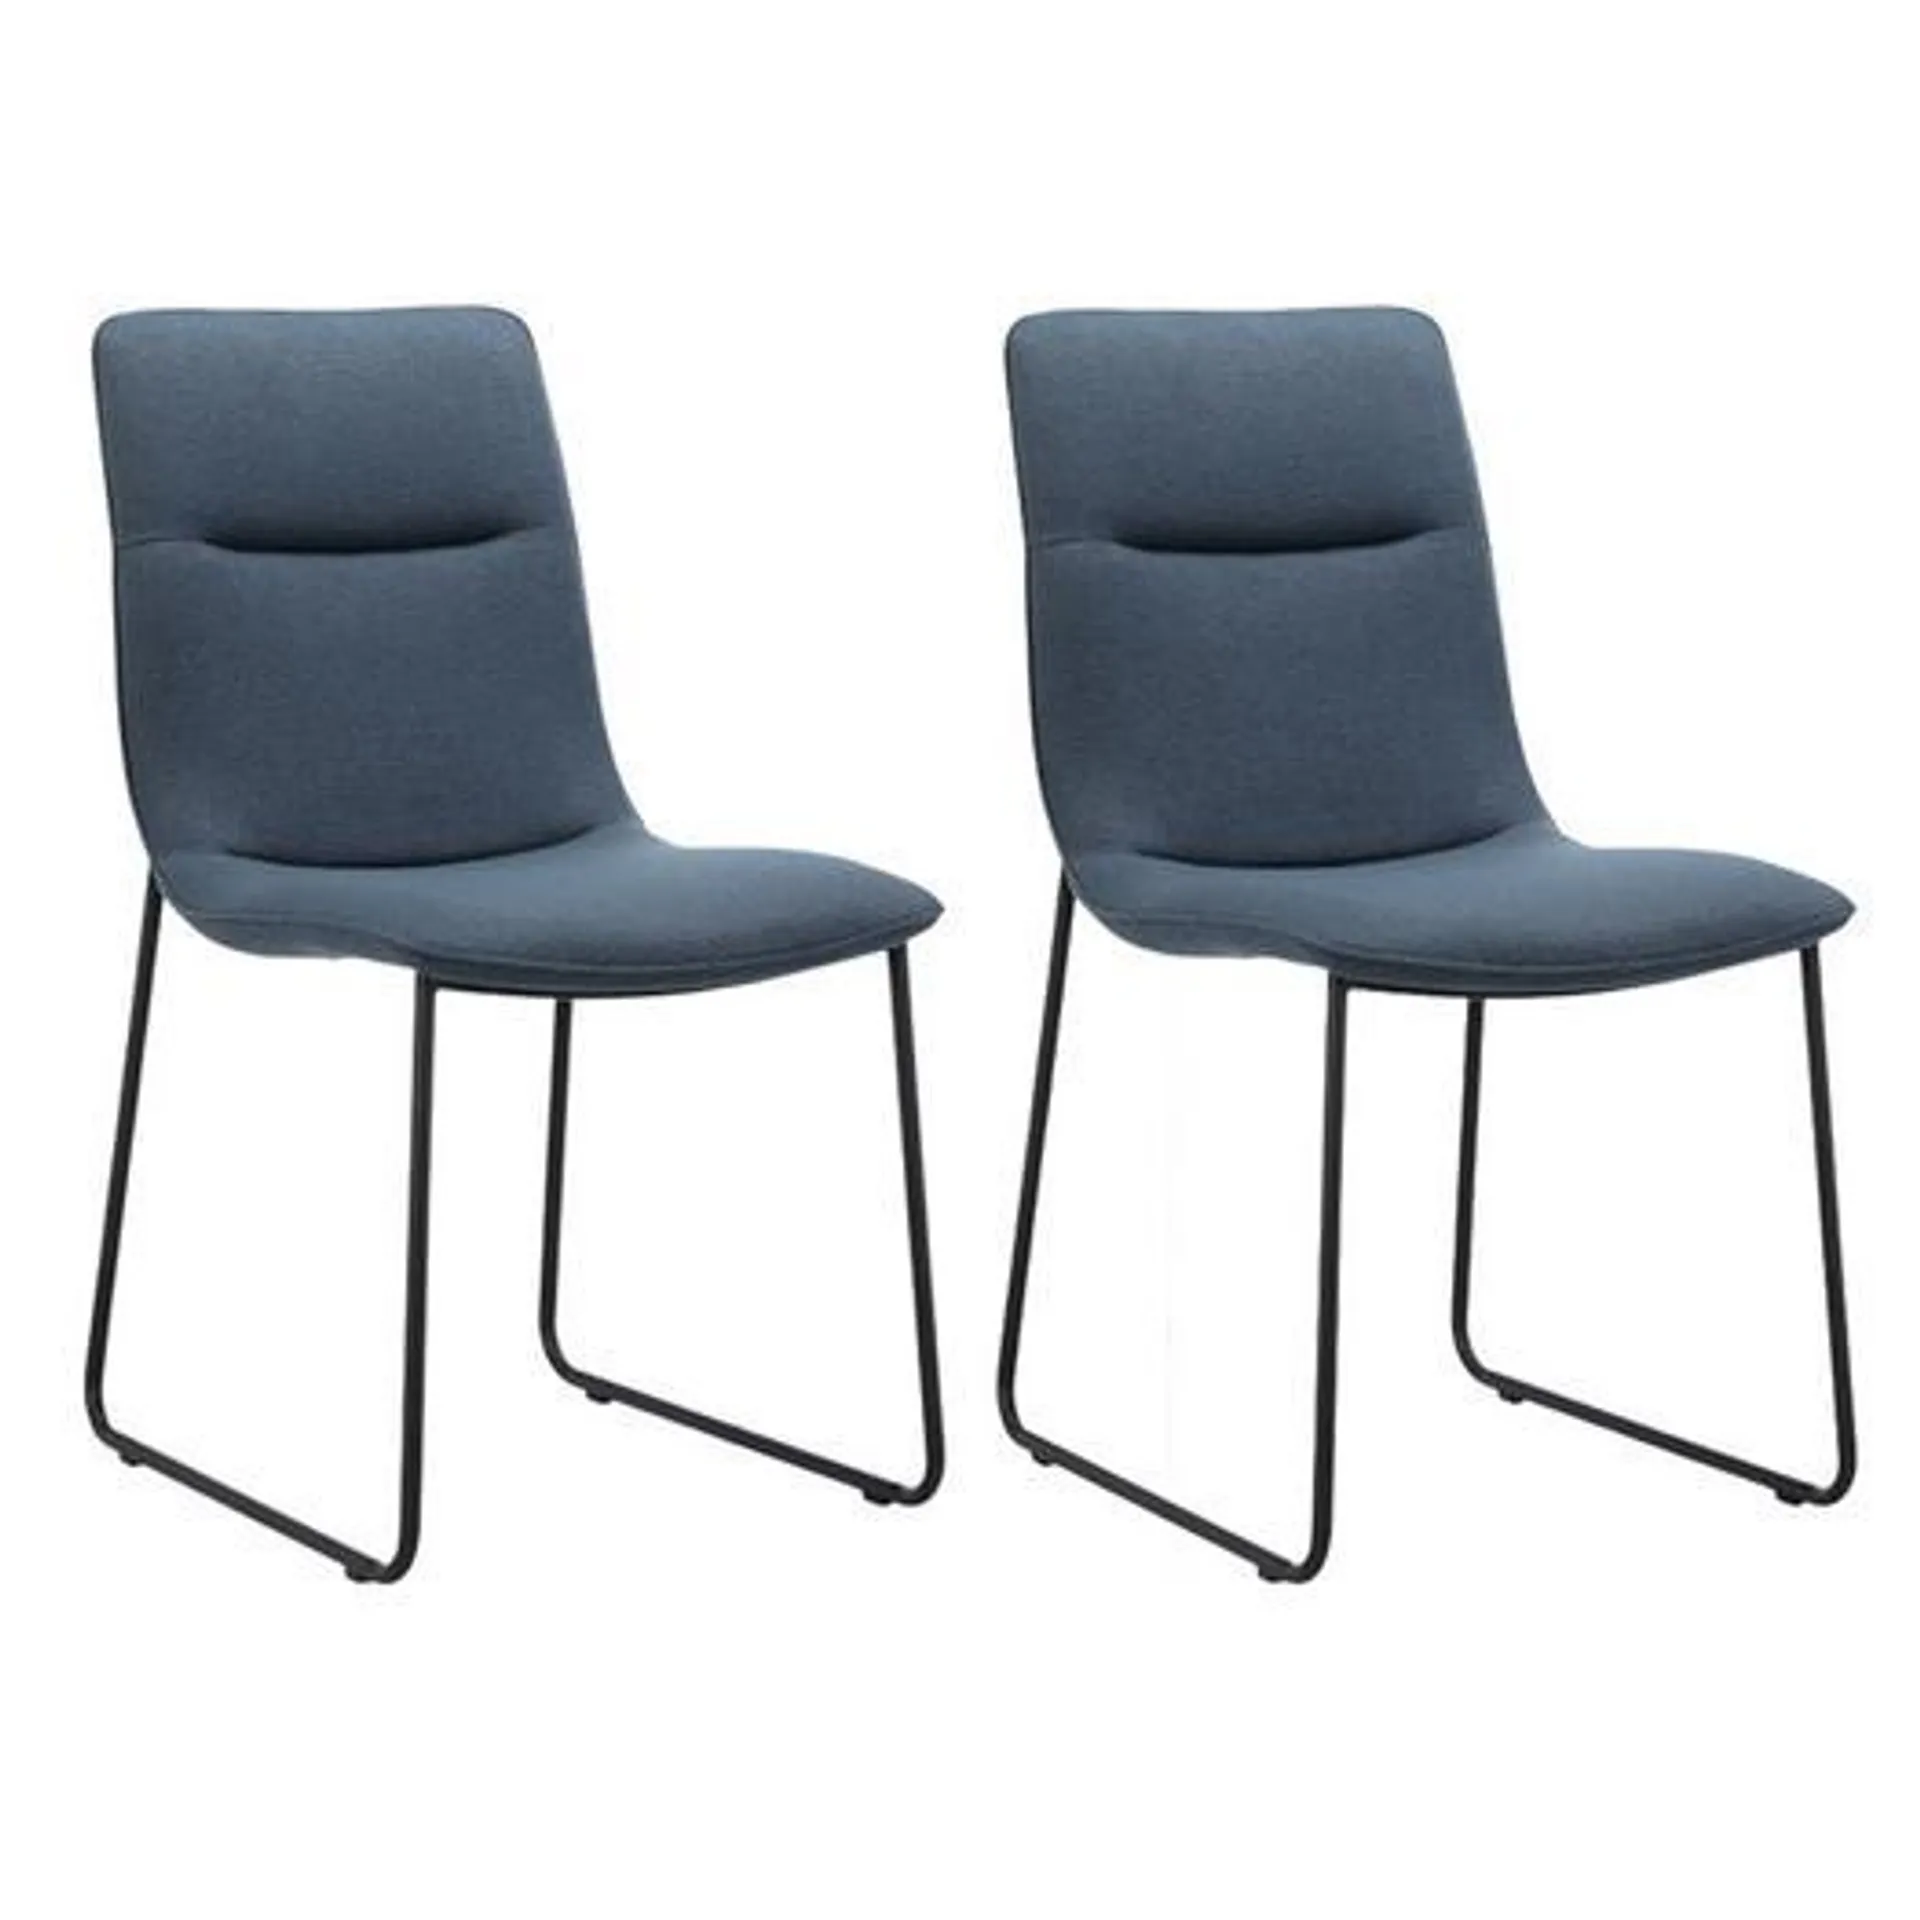 Cenzo Set of 2 Dining Chairs